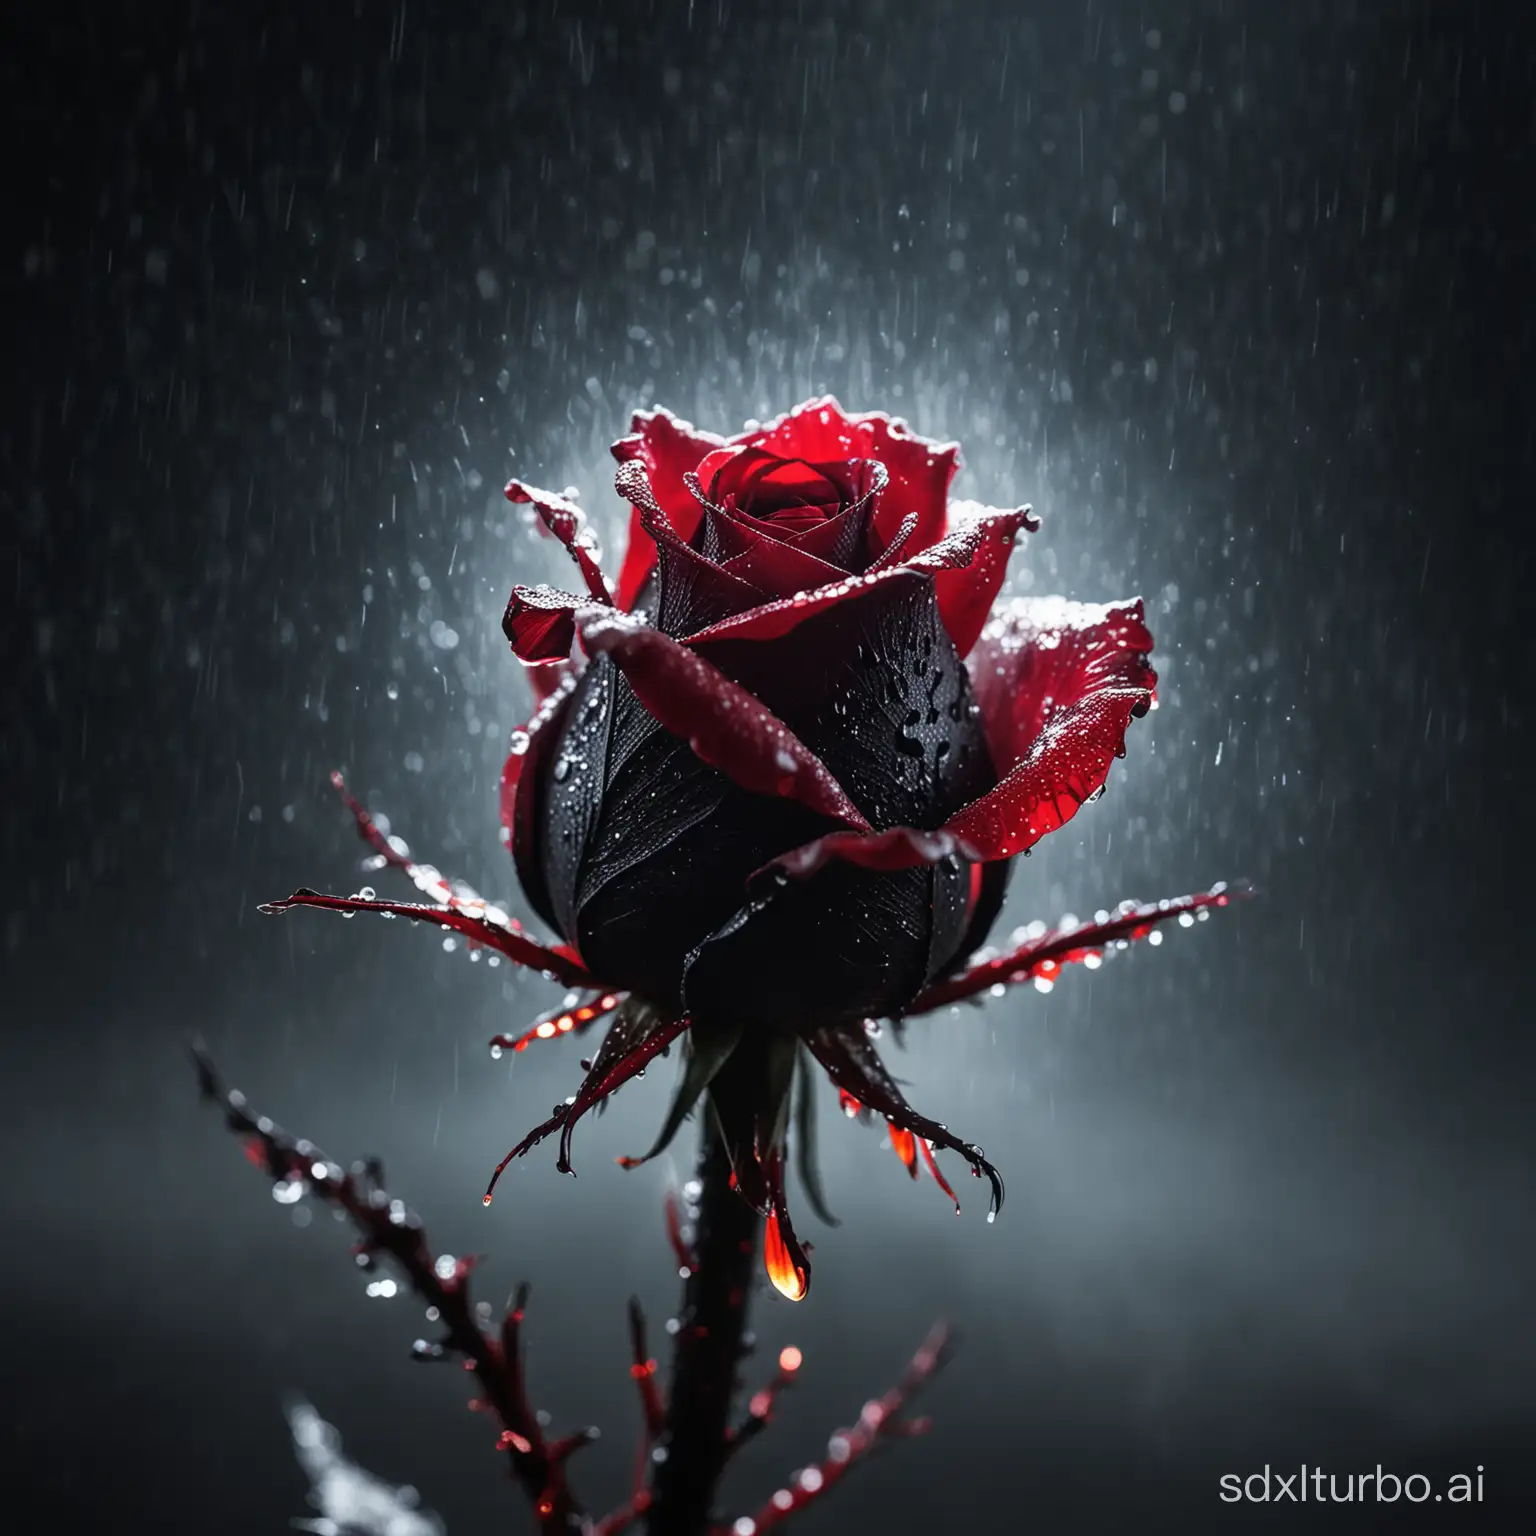 Dynamic-Red-Neon-Black-Rose-in-Night-Fog-Cinematic-Still-with-Water-Droplets-and-Reflections